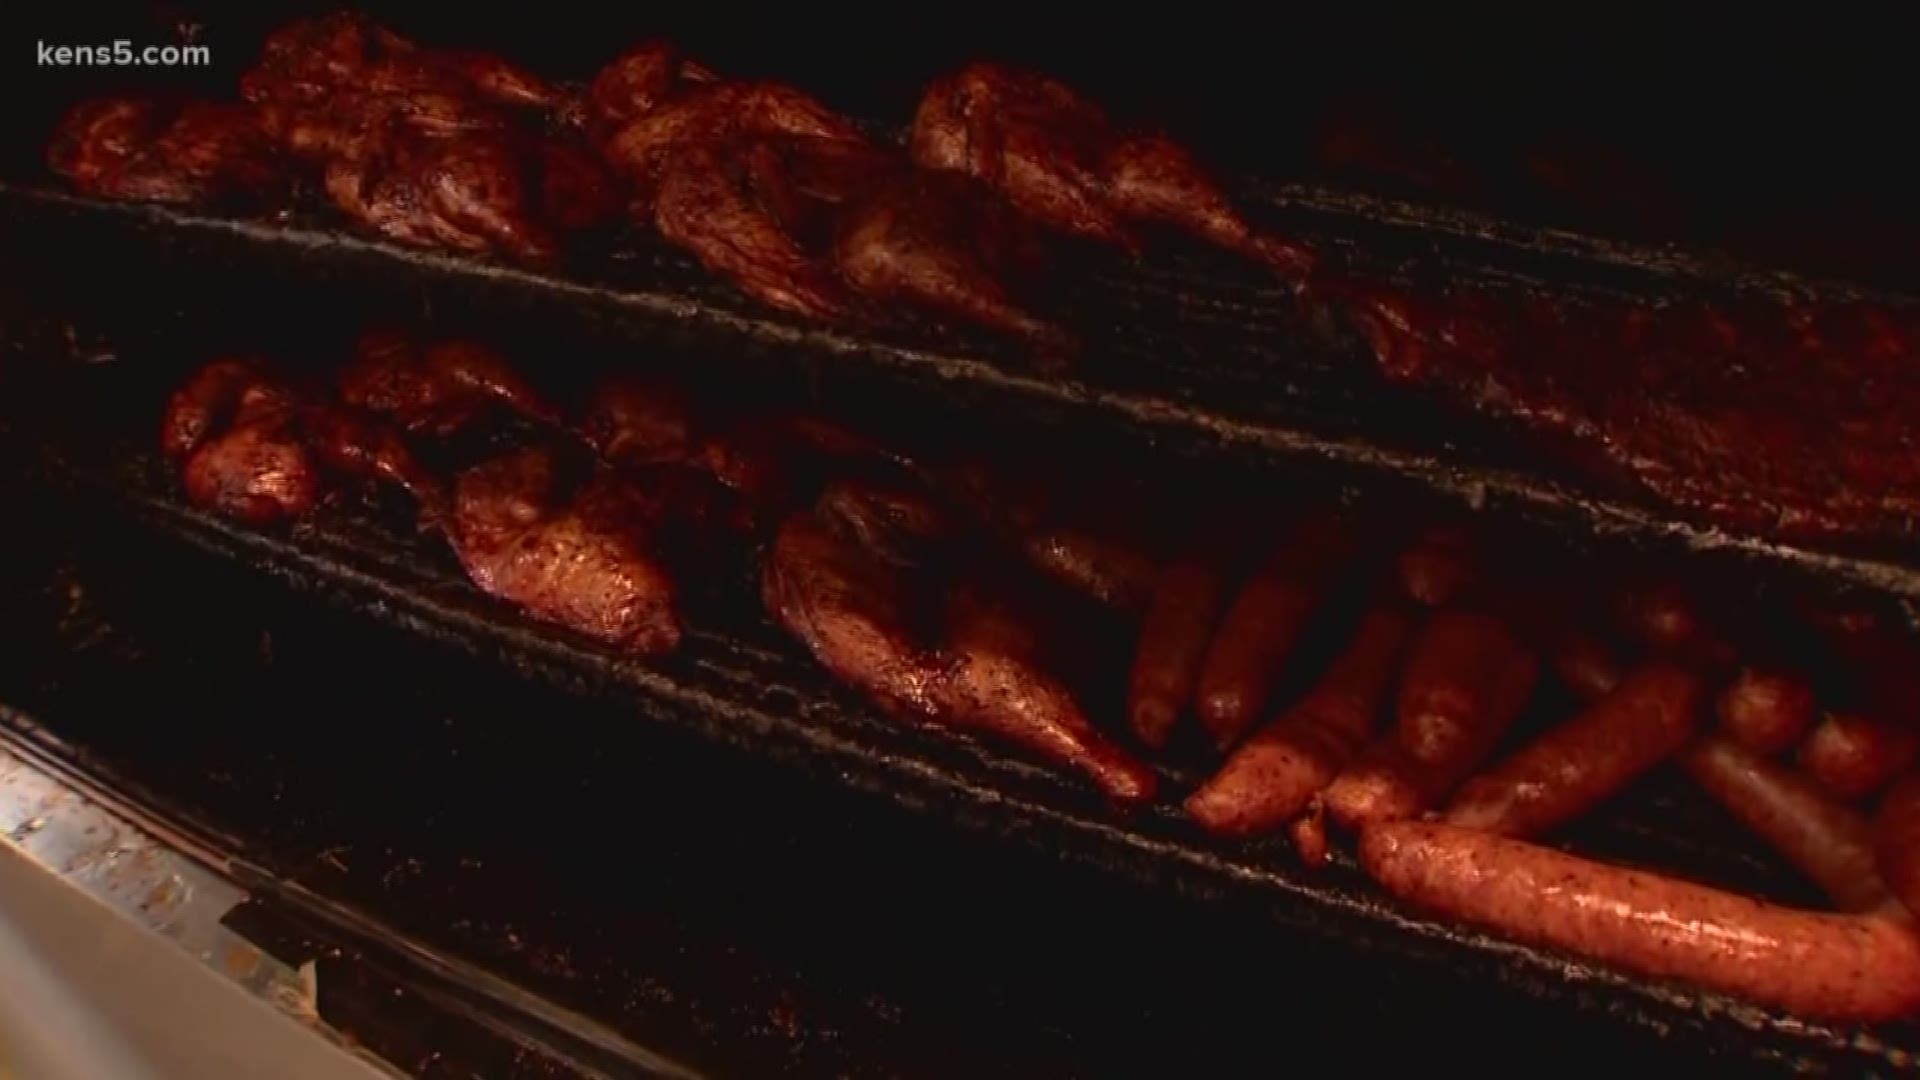 The Neighborhood Eats 'Great Grill Almighty Tour' continues on the city's south side. Marvin Hurst takes on a Texas-sized taste test at a BBQ joint that's been smoking for nearly 35 years.